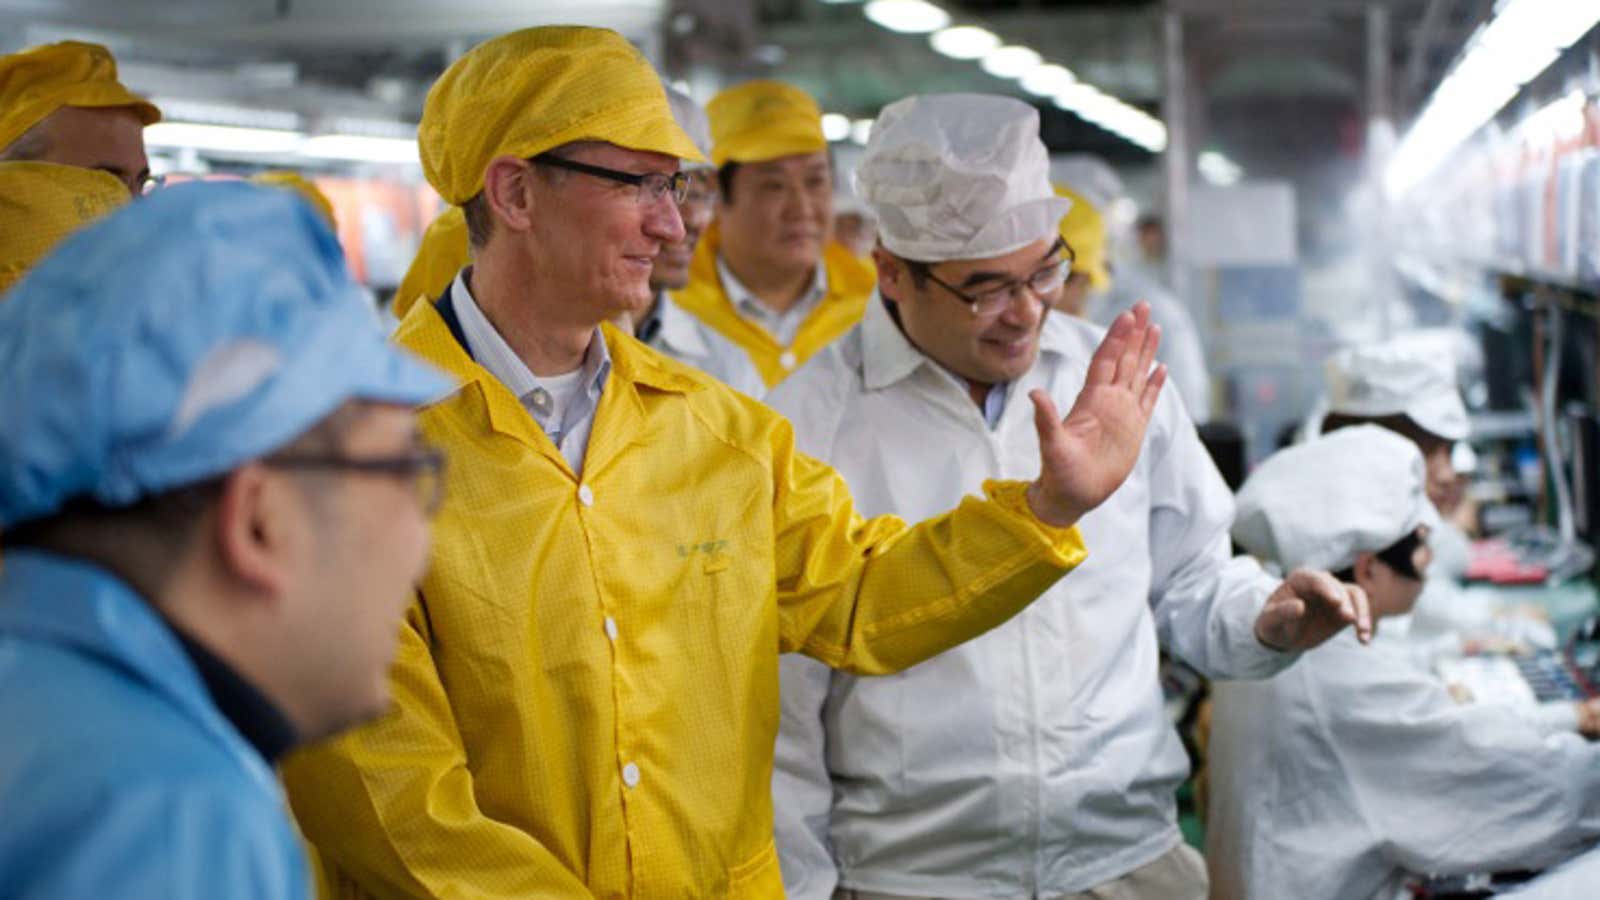 Fewer white-suited Foxconn workers to wave to next time Tim Cook pays a visit?